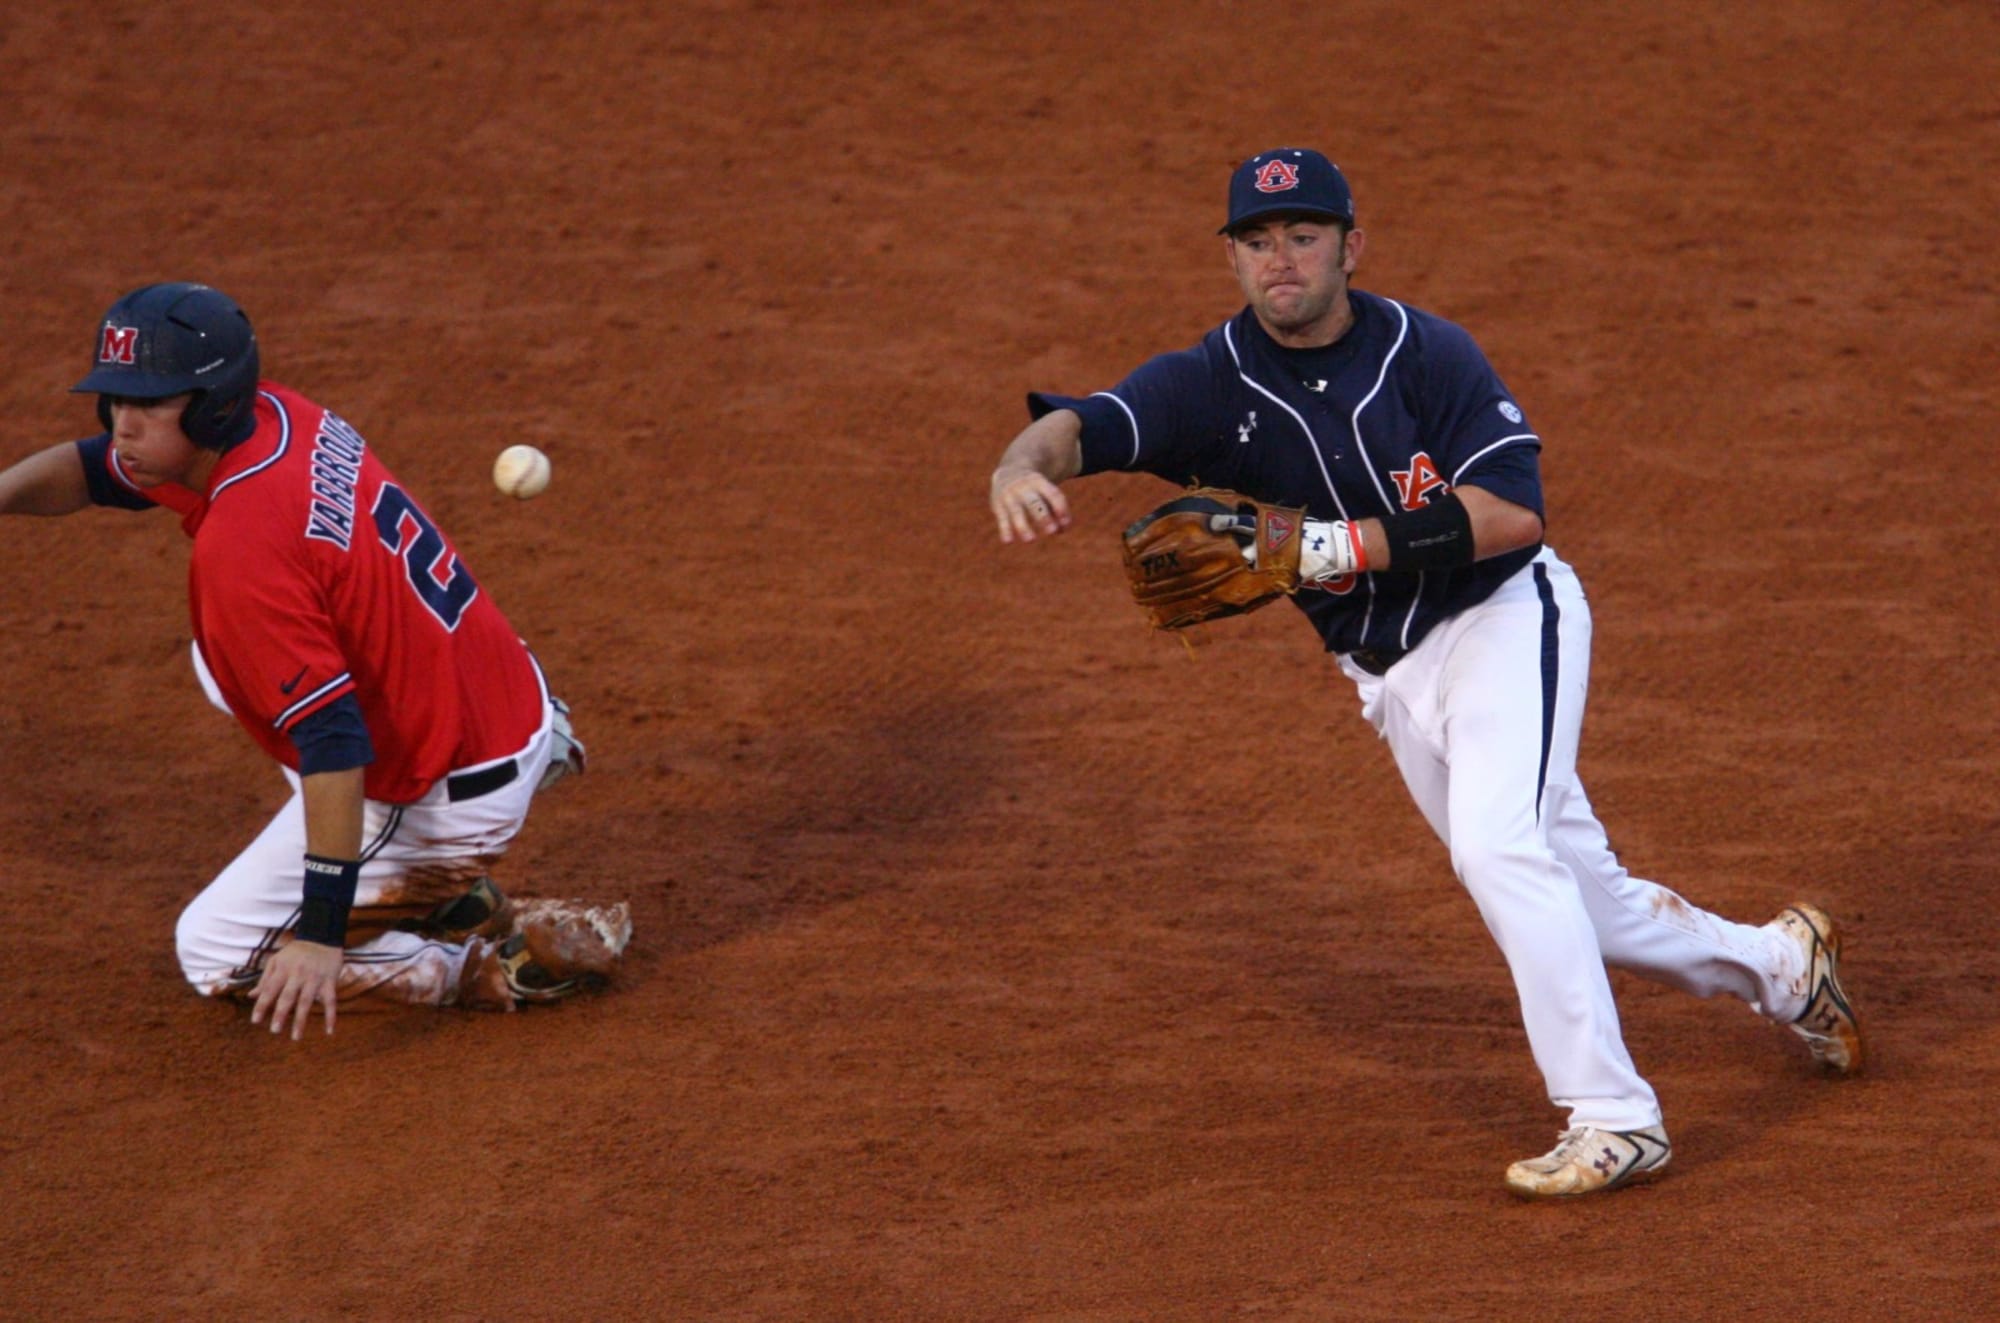 Auburn vs. Ole Miss College World Series Who is the betting favorite?